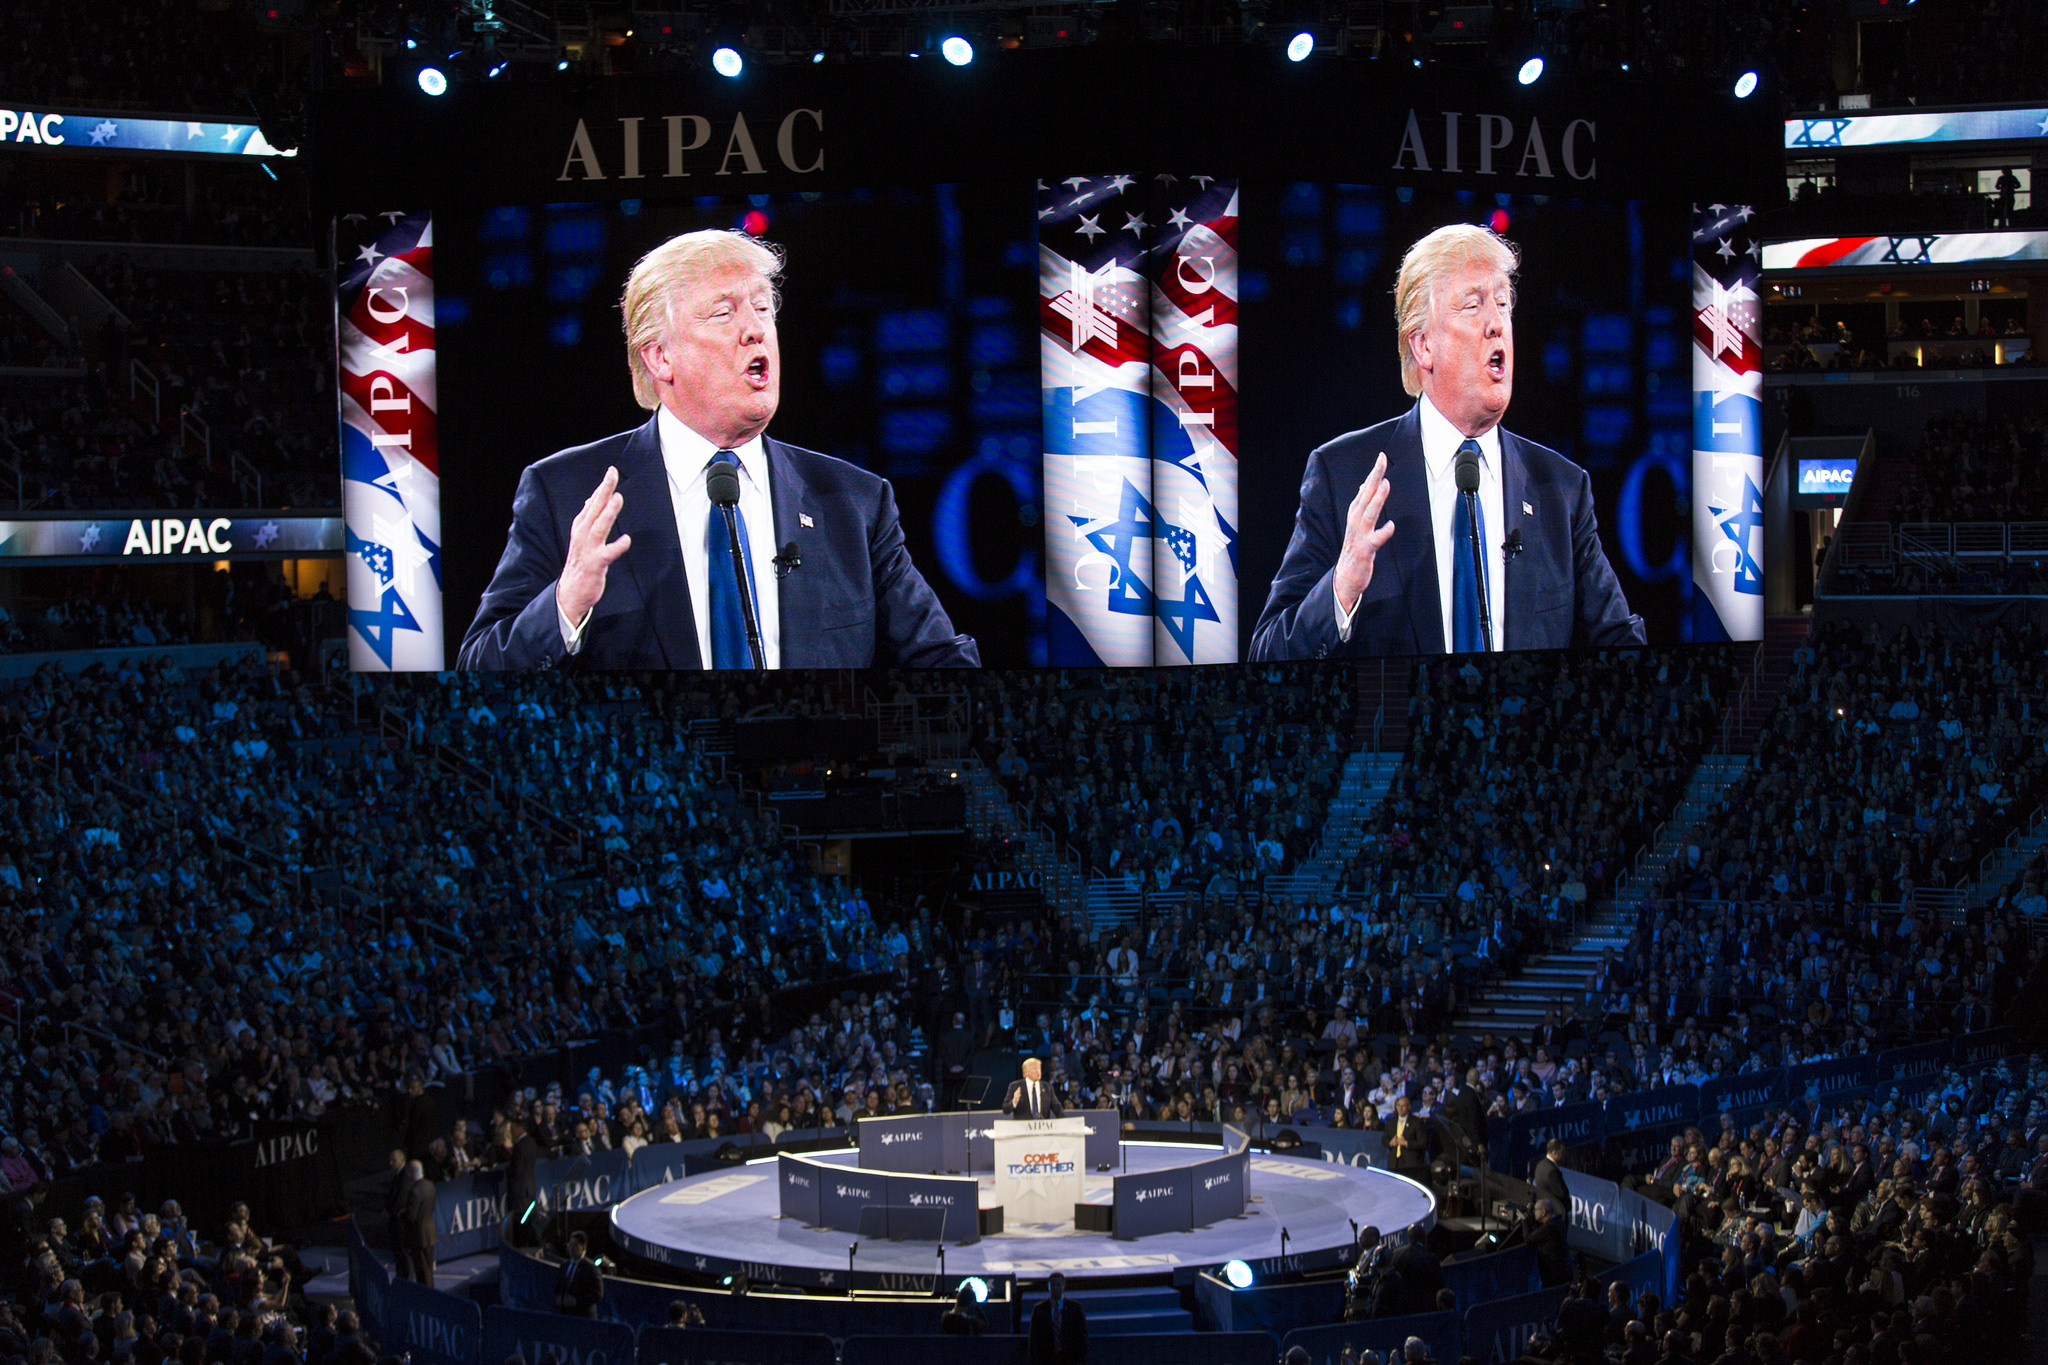 Trump speaking at AIPAC March 21, 2016